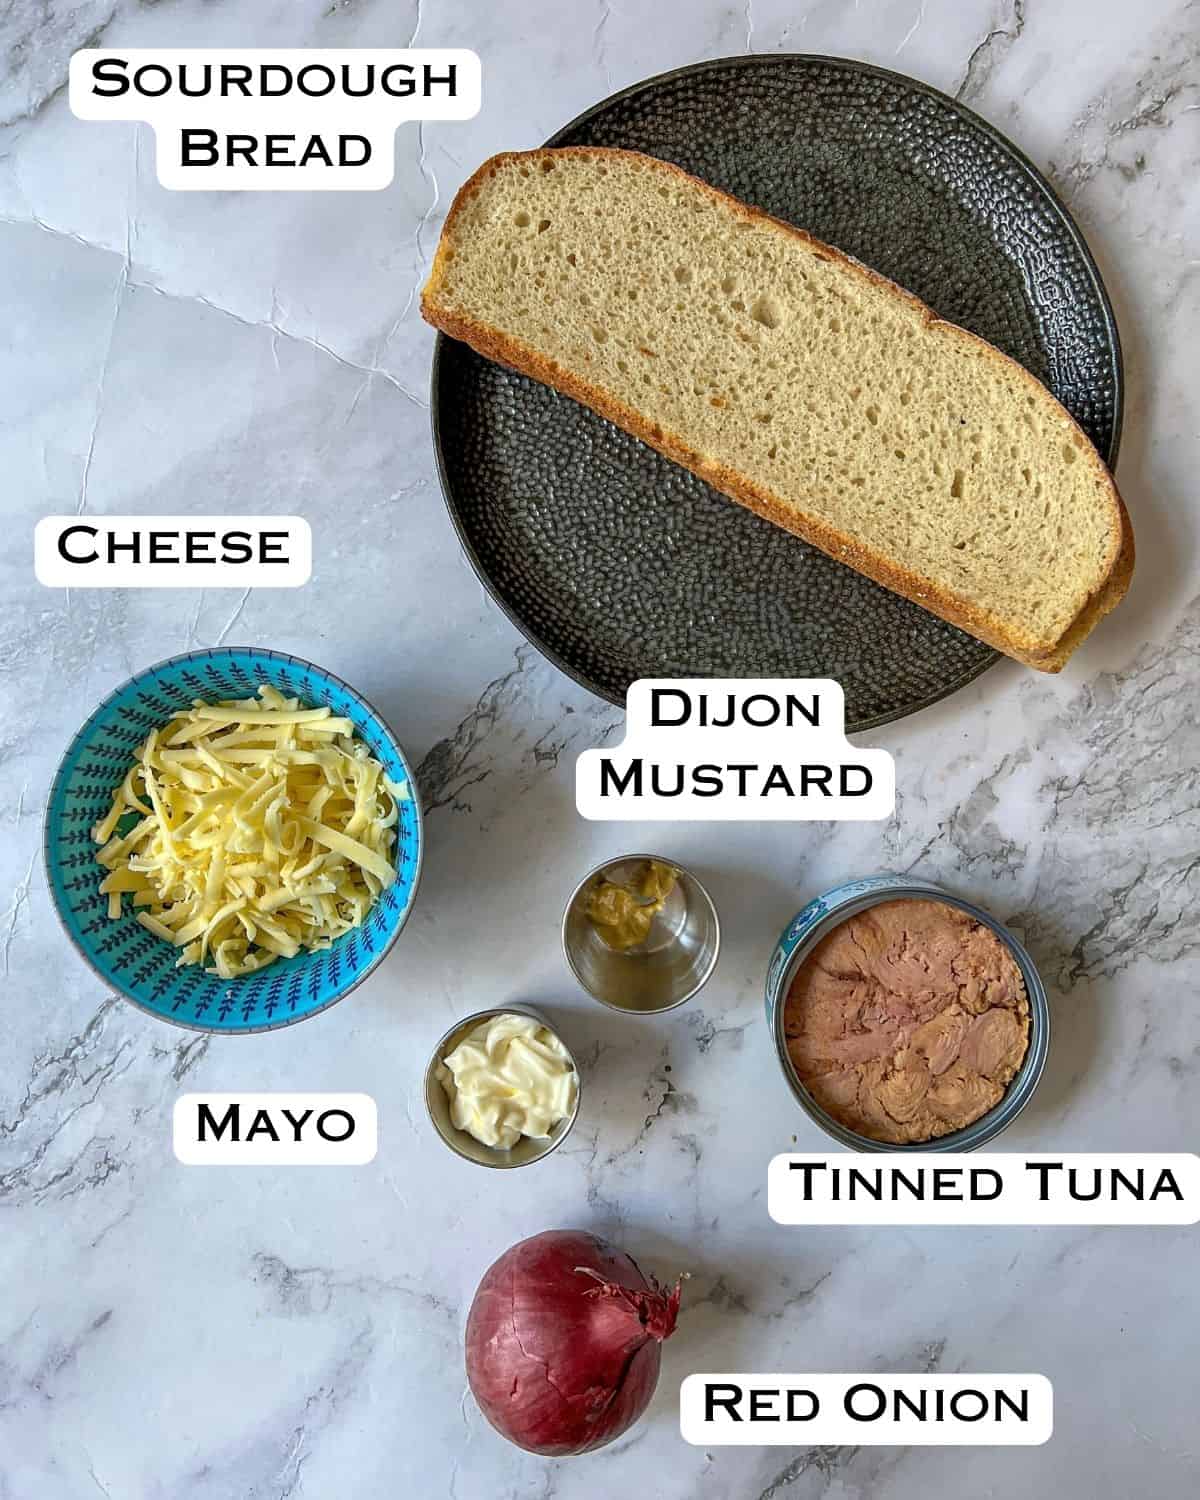 Ingredients laid out for a tuna melt sandwich.